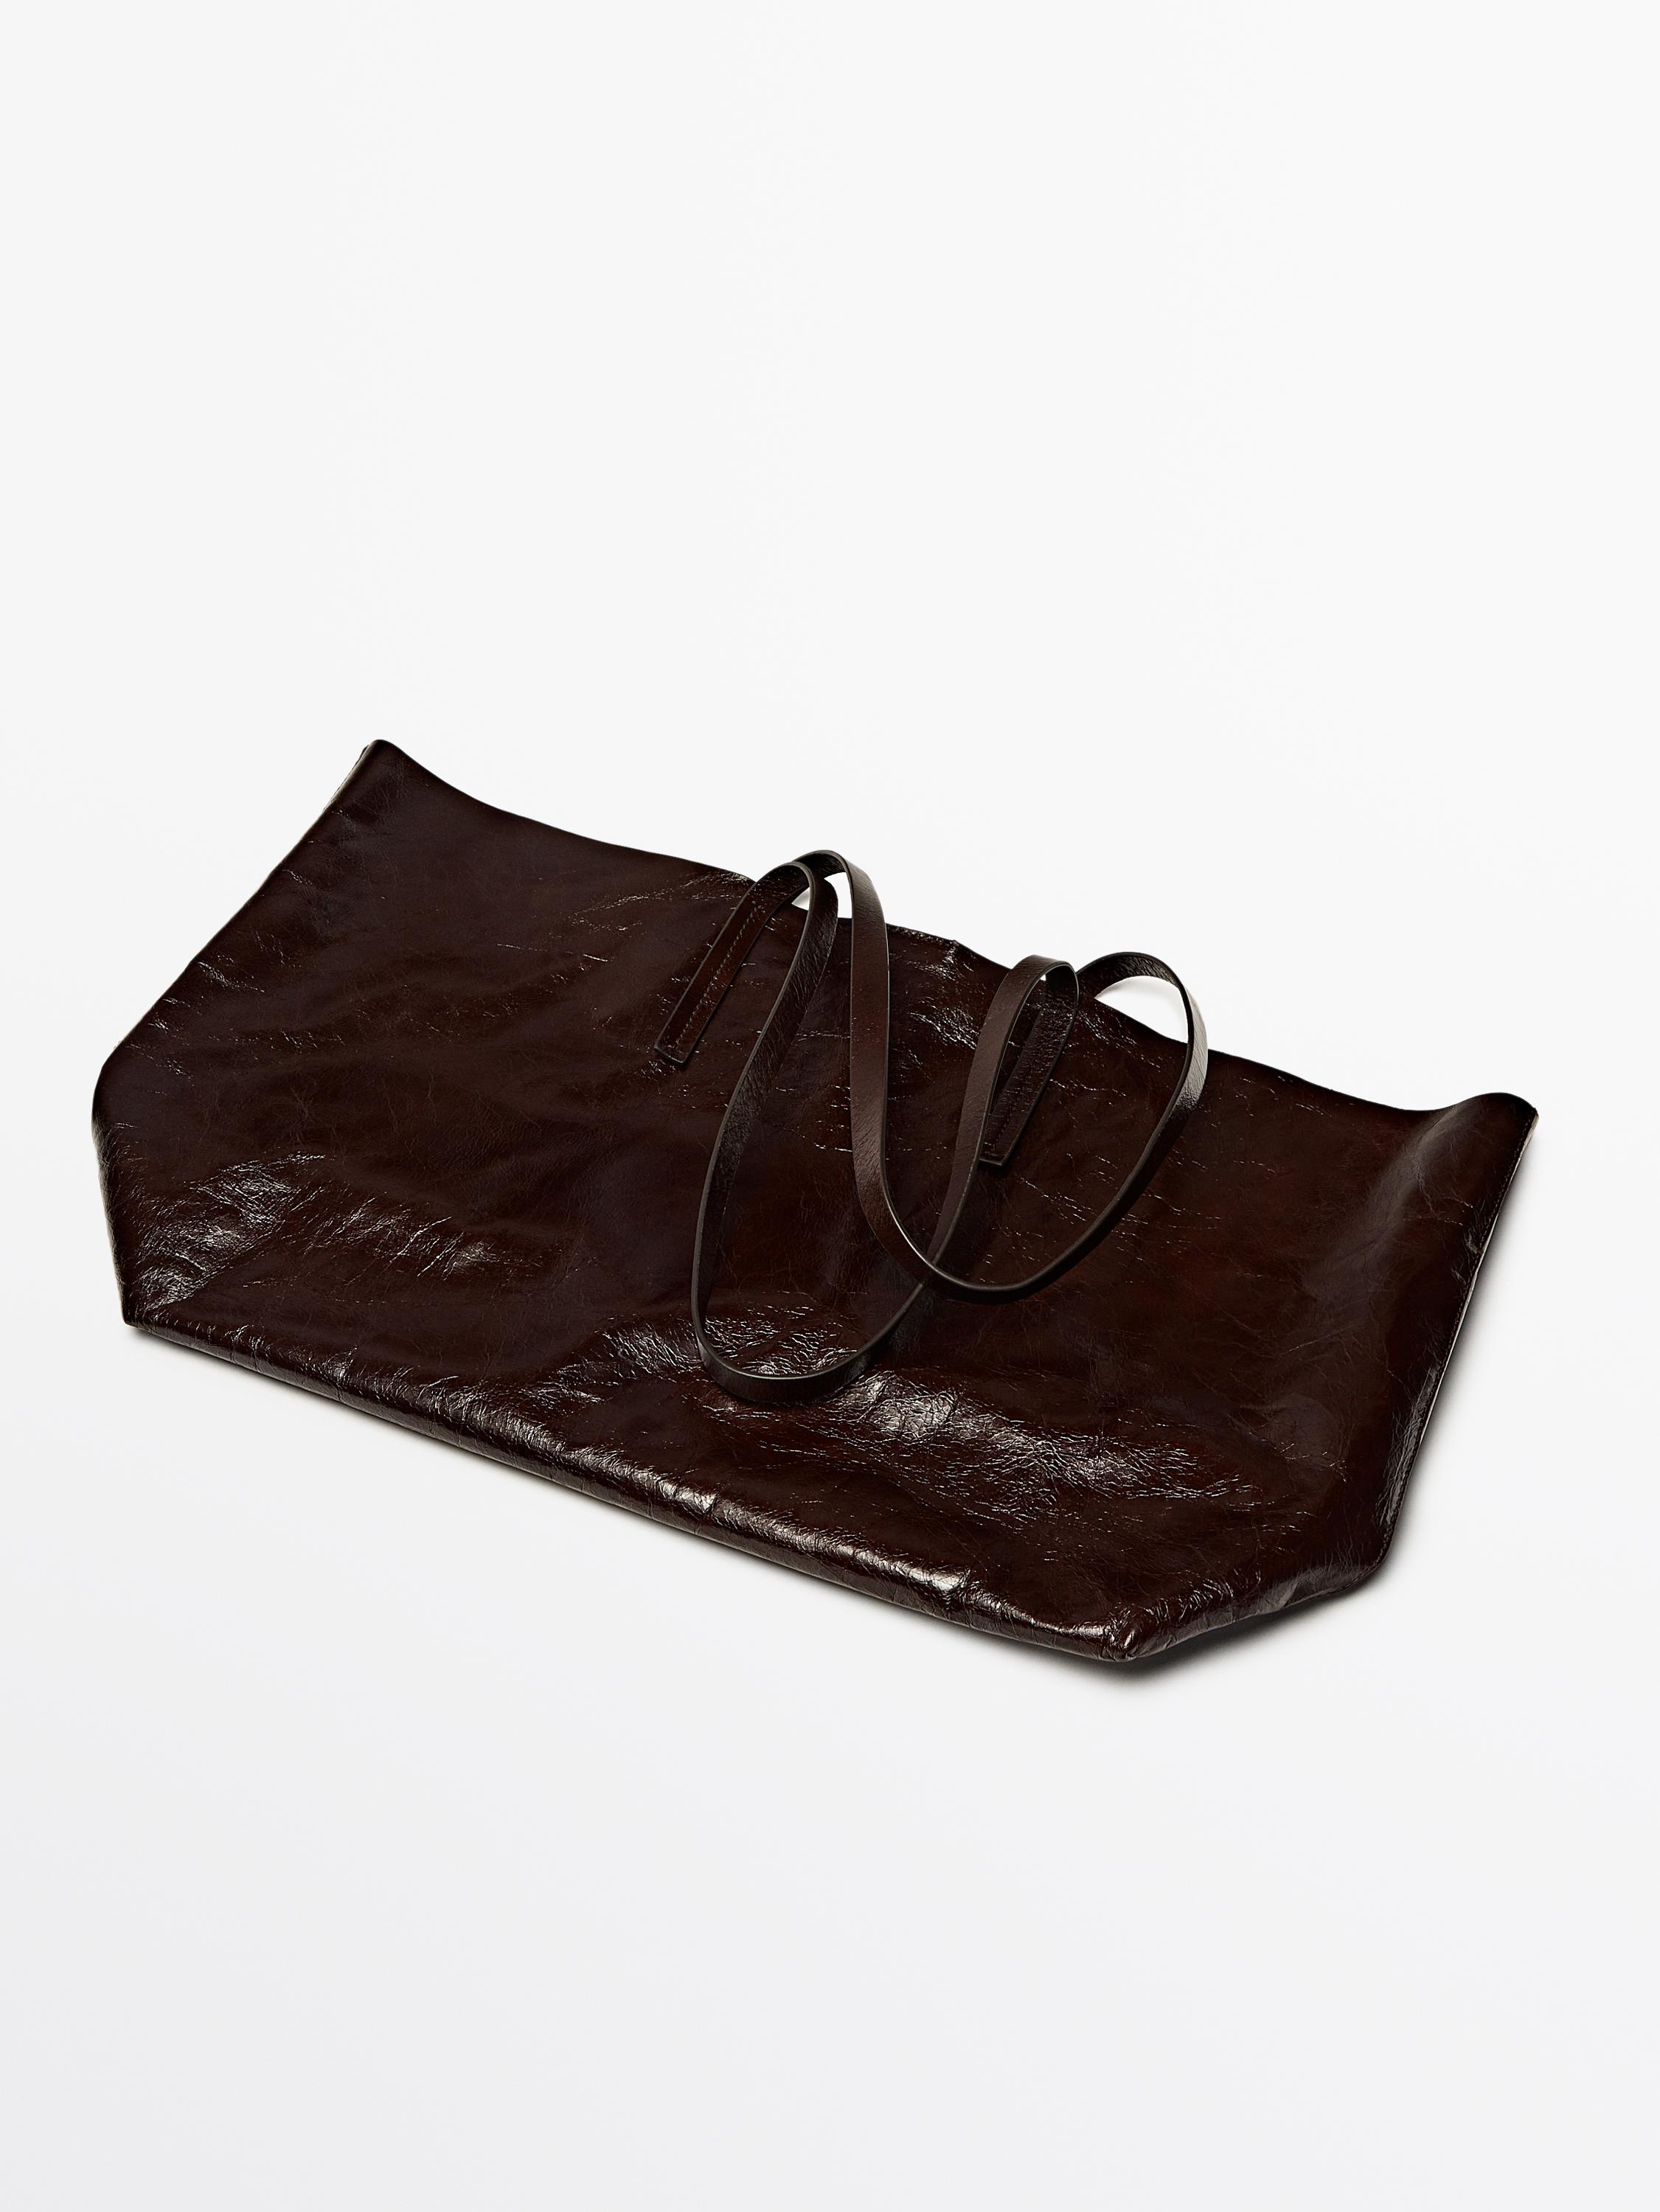 Leather tote bag with a crackled finish - Brown | ZARA United States